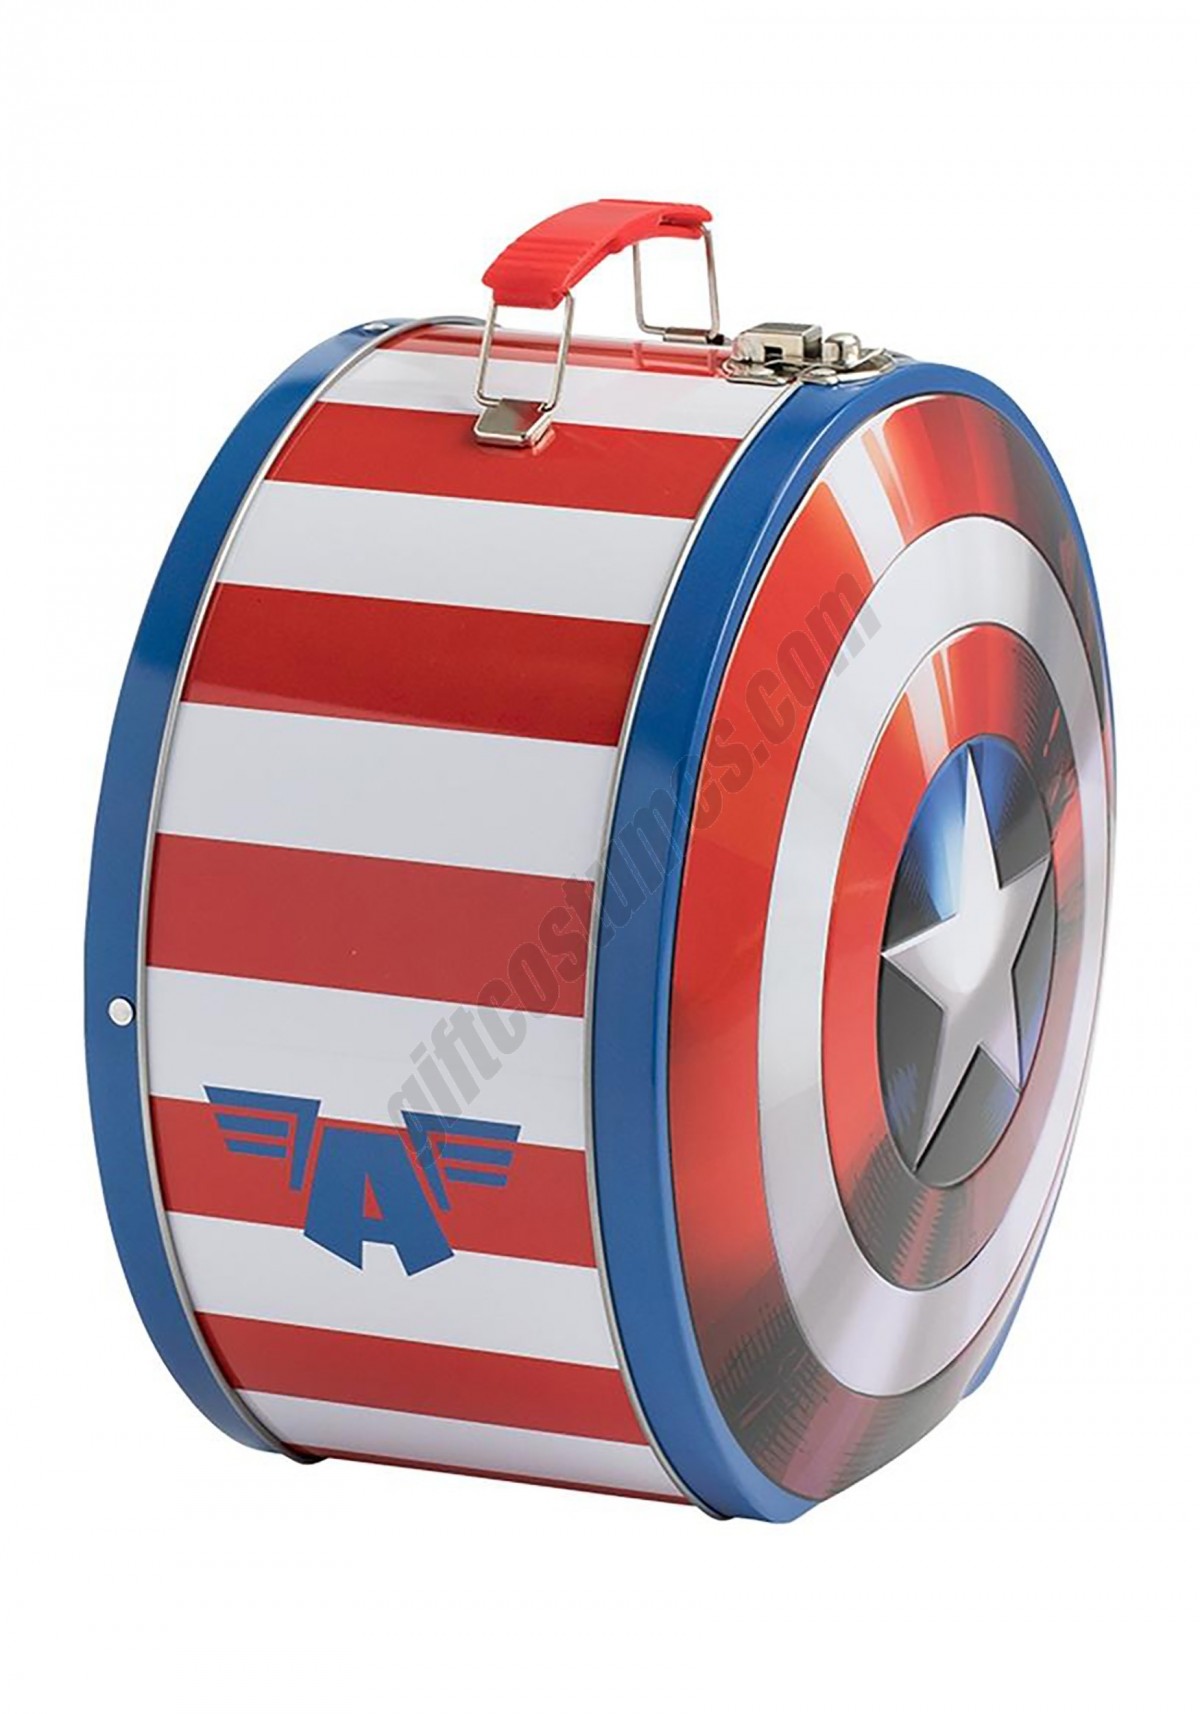 Marvels Captain America Shield Shaped Tin Tote Promotions - -2